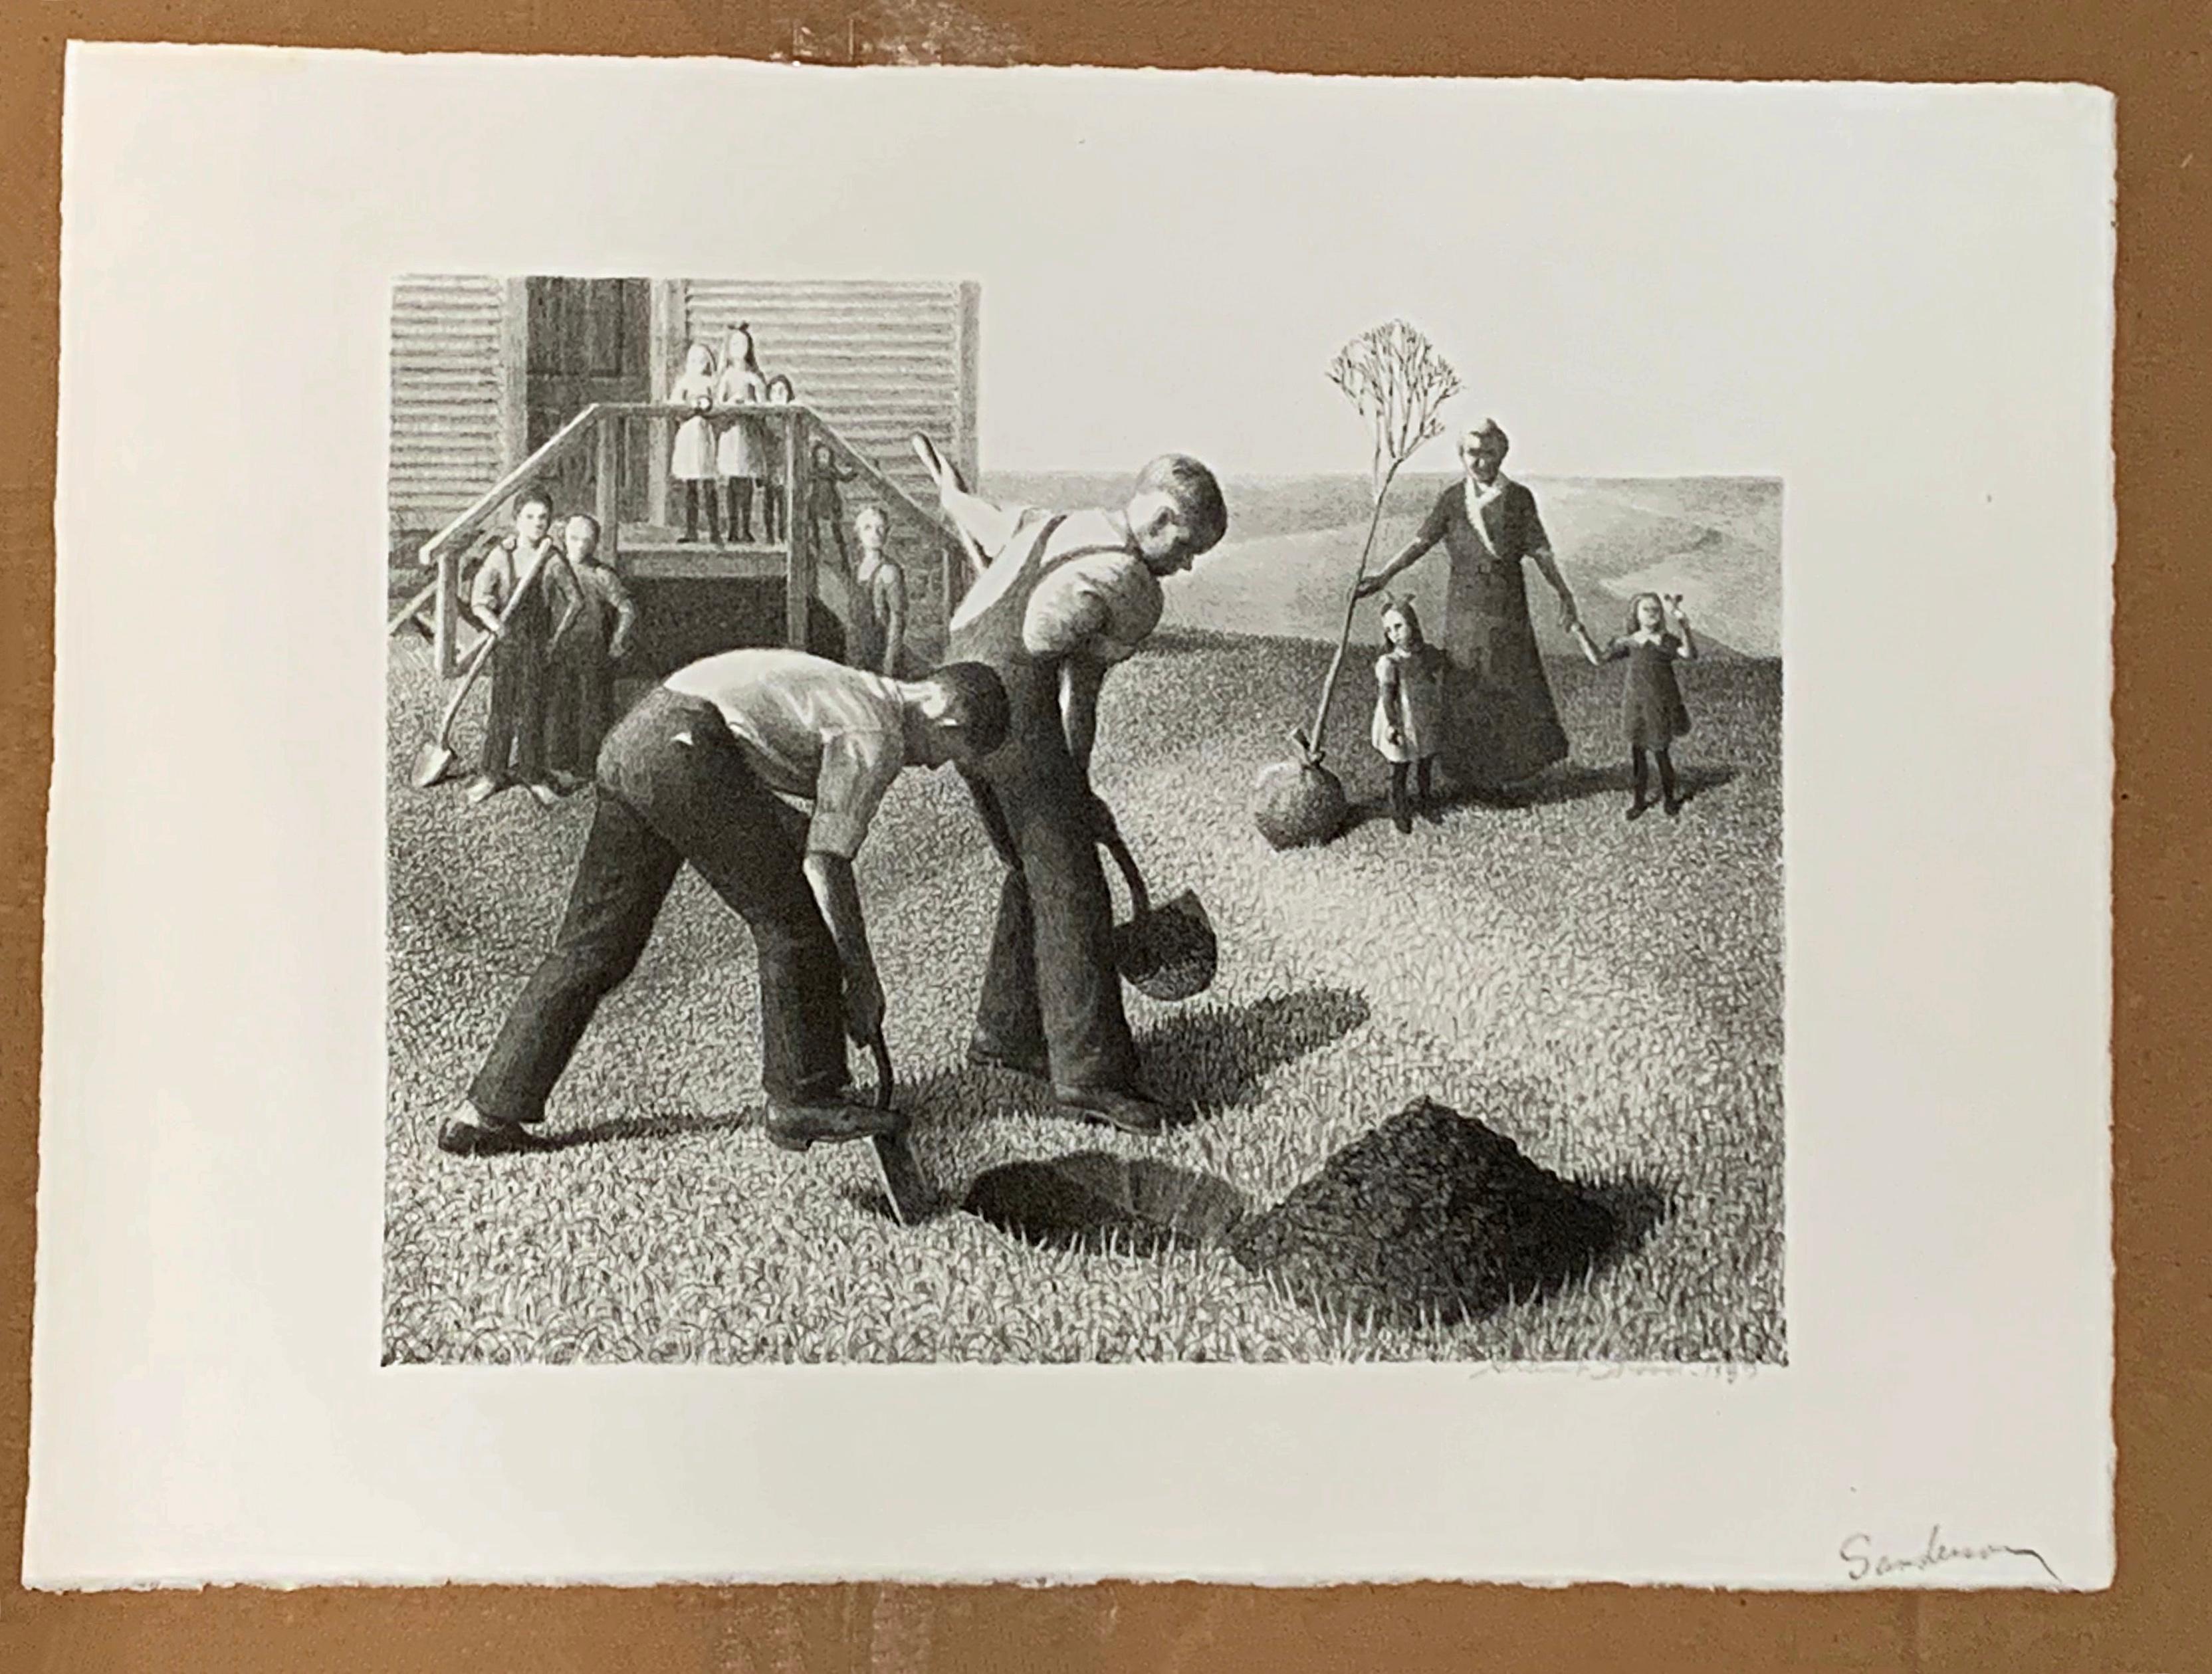 TREE PLANTING GROUP - Print by Grant Wood